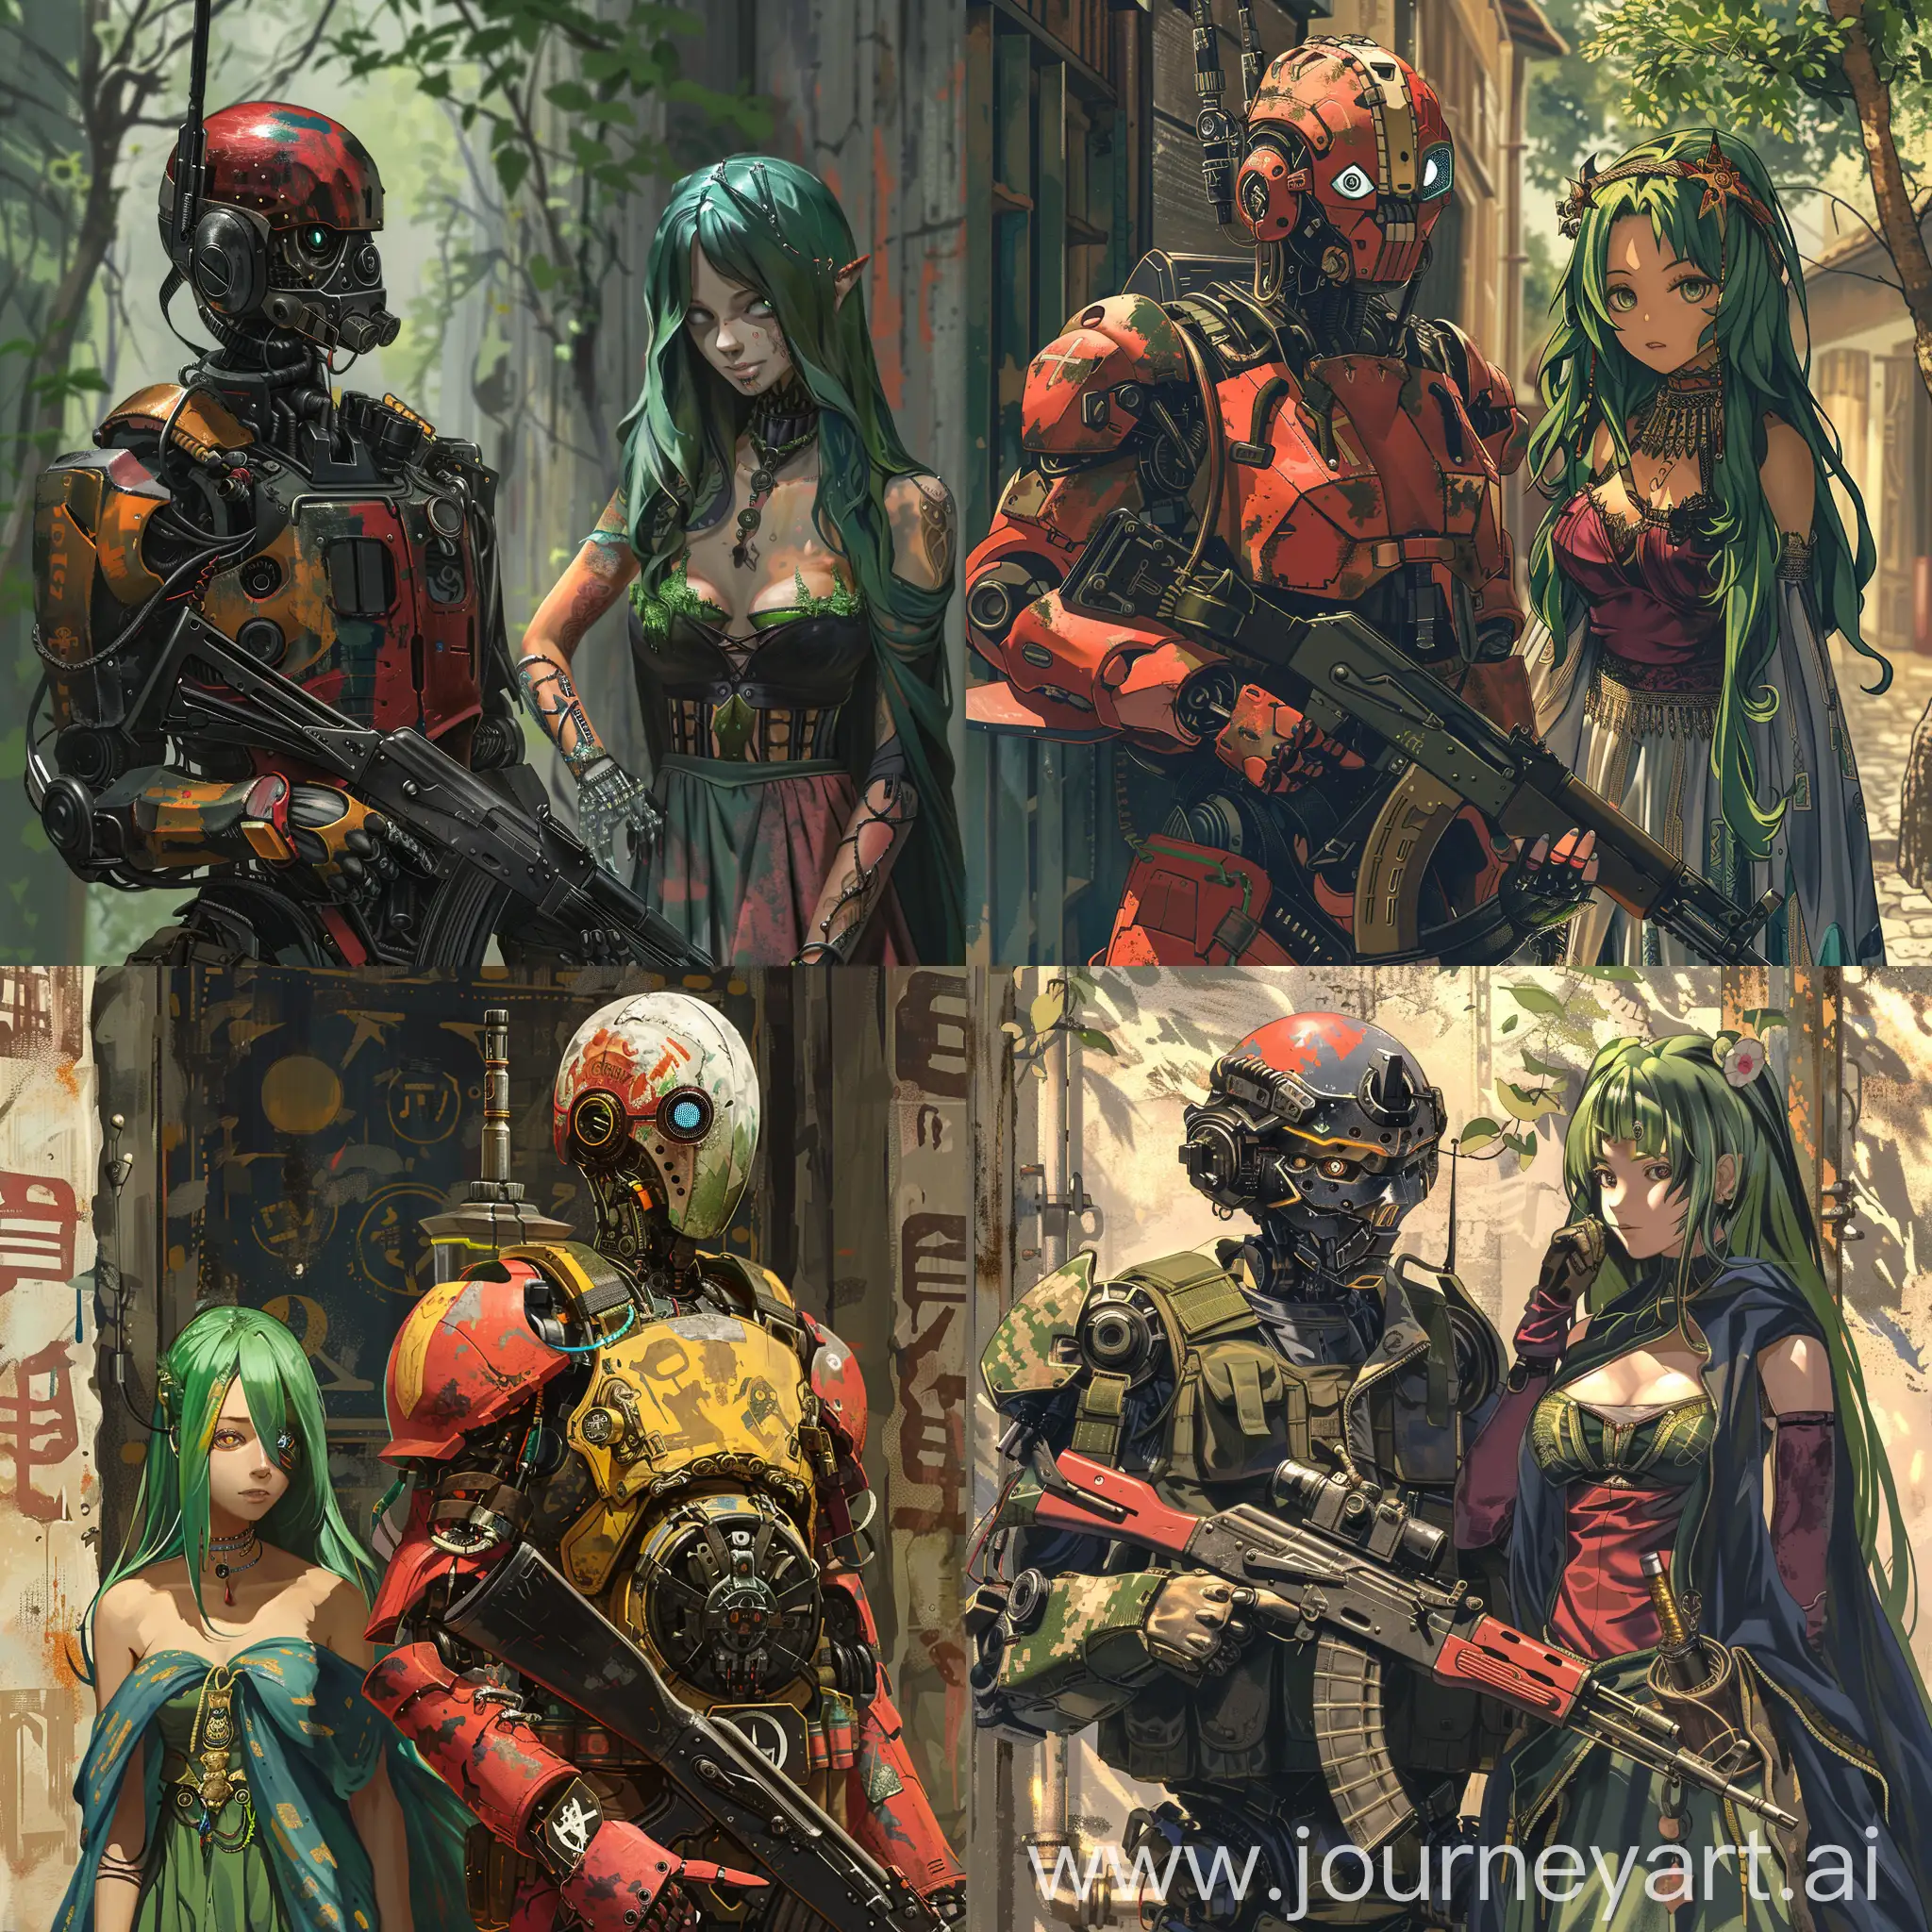 A robot in military colors, humanoid, armored, with an AK-47 assault rifle, wearing a mask with one eye, standing next to a girl with green hair in magical clothes, 4k, anime style, dark fantasy